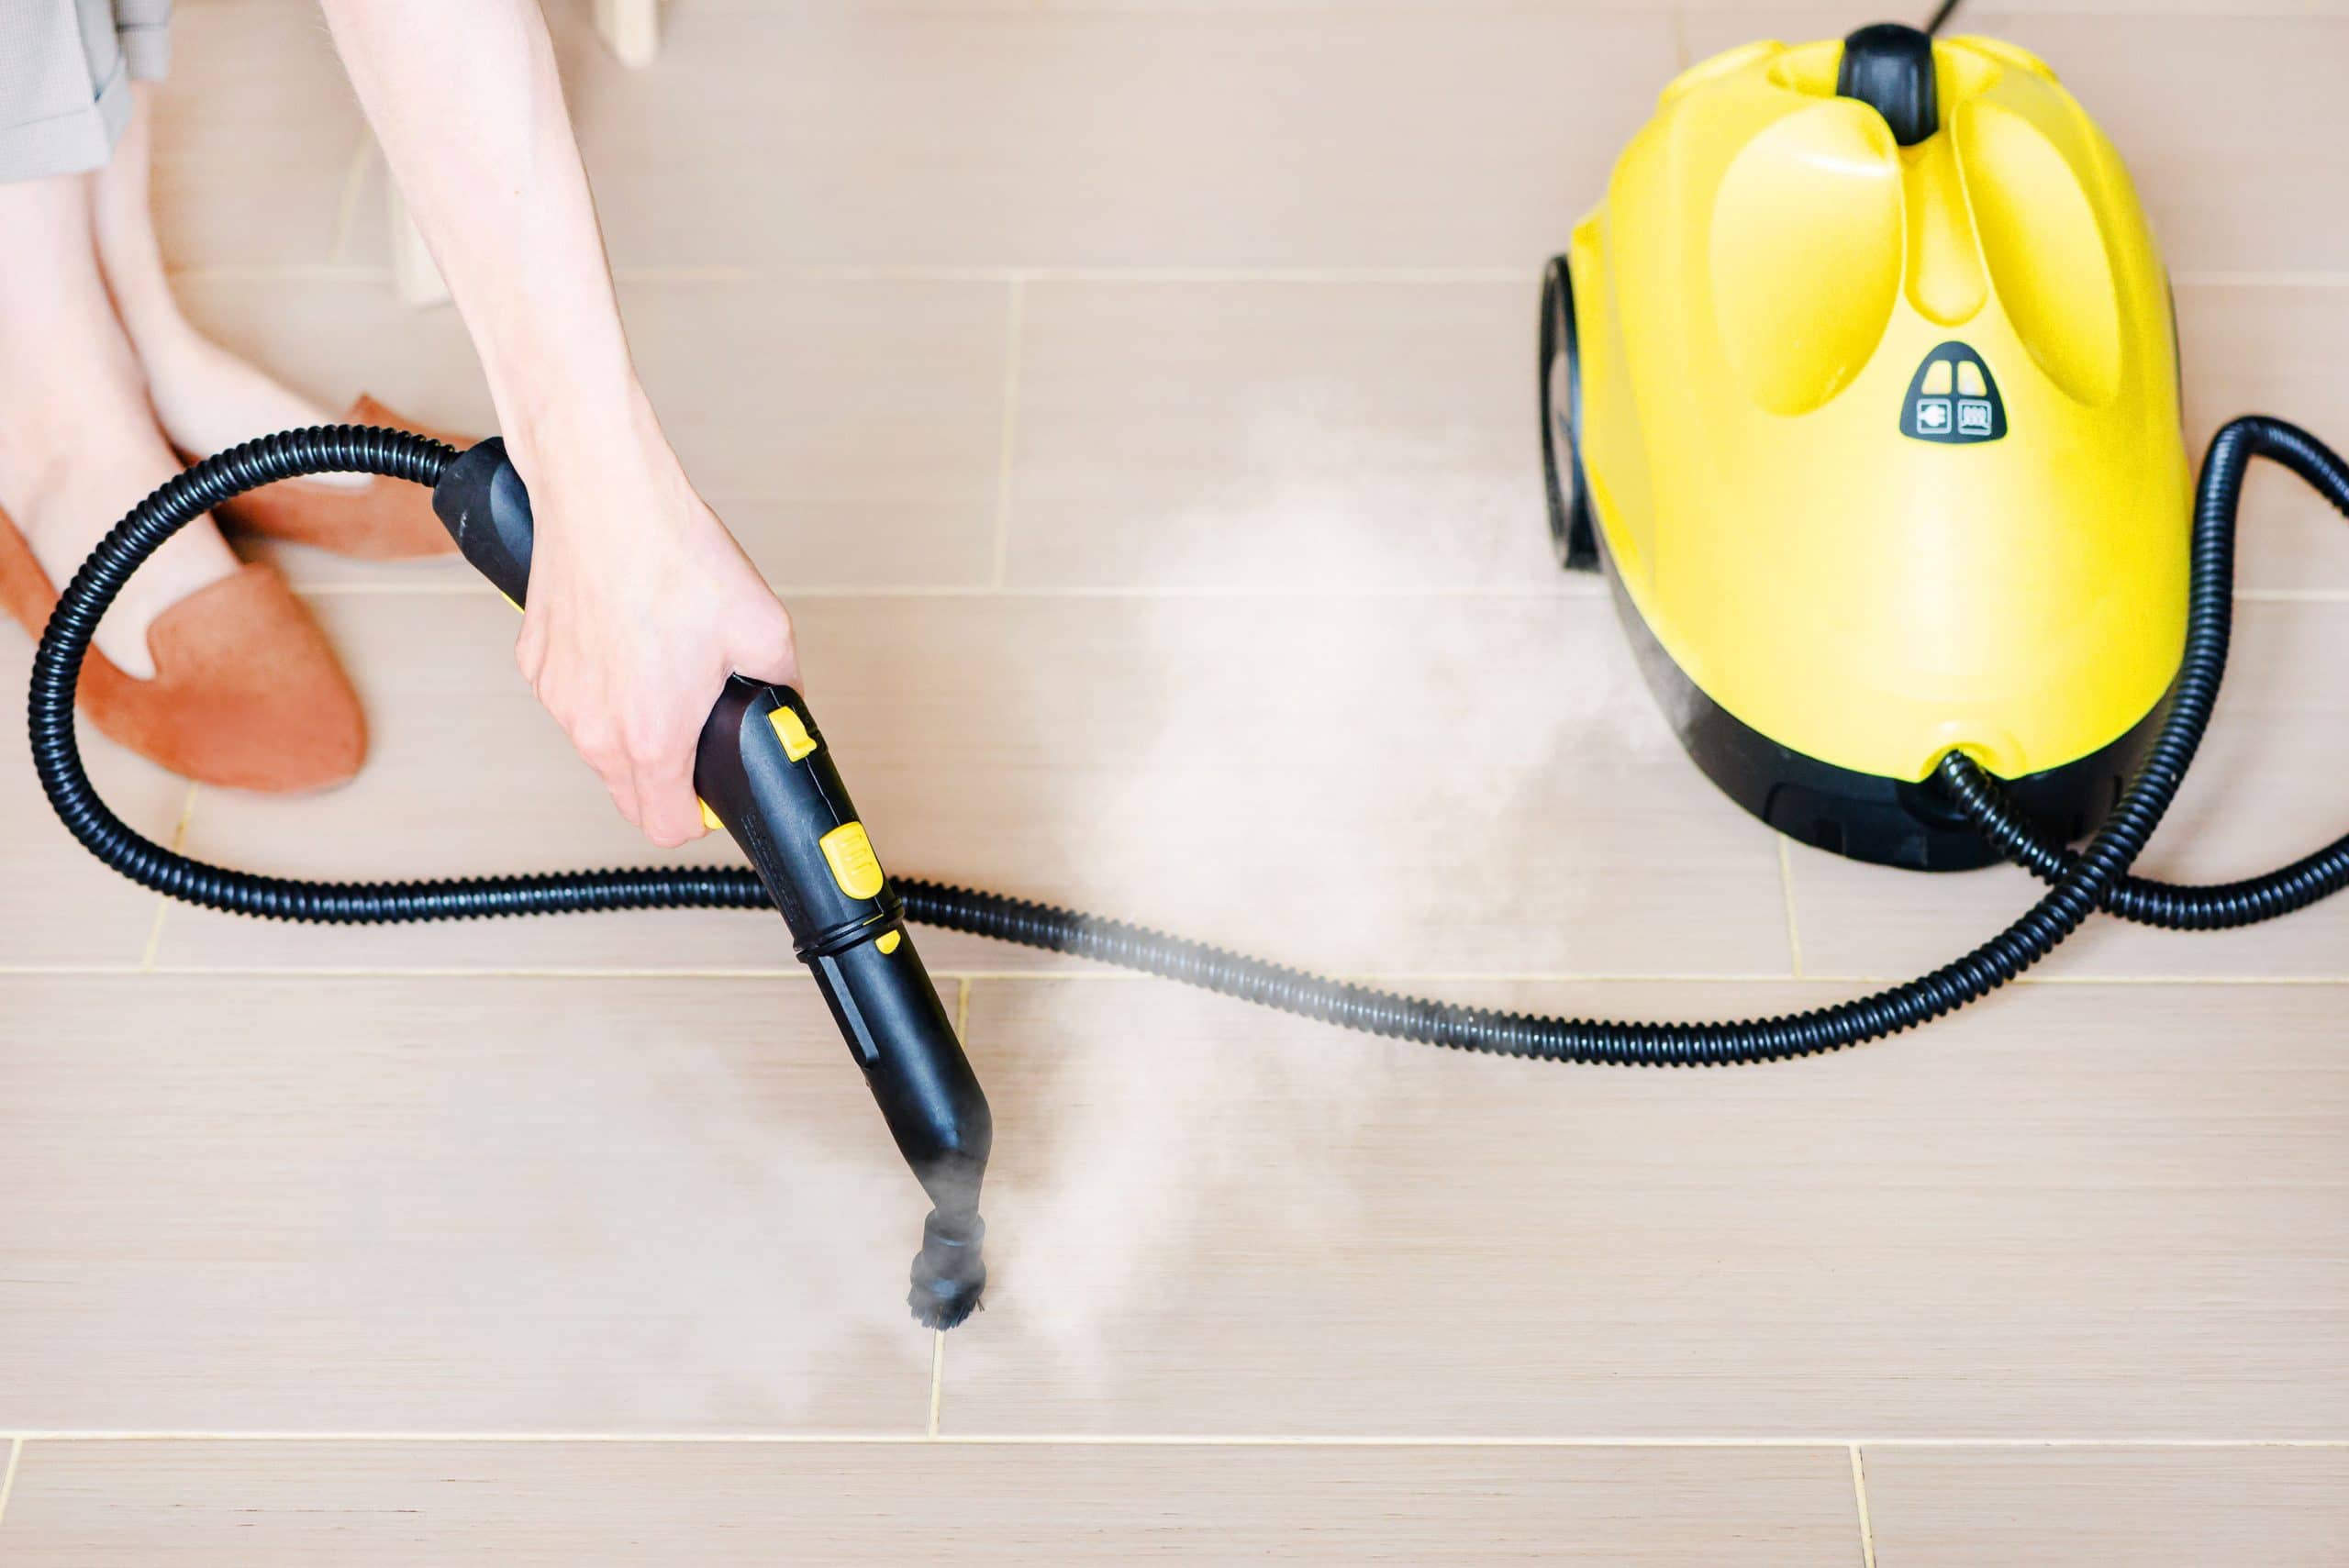 Expert Advice: Why Switch To Steam Cleaners For Your Home